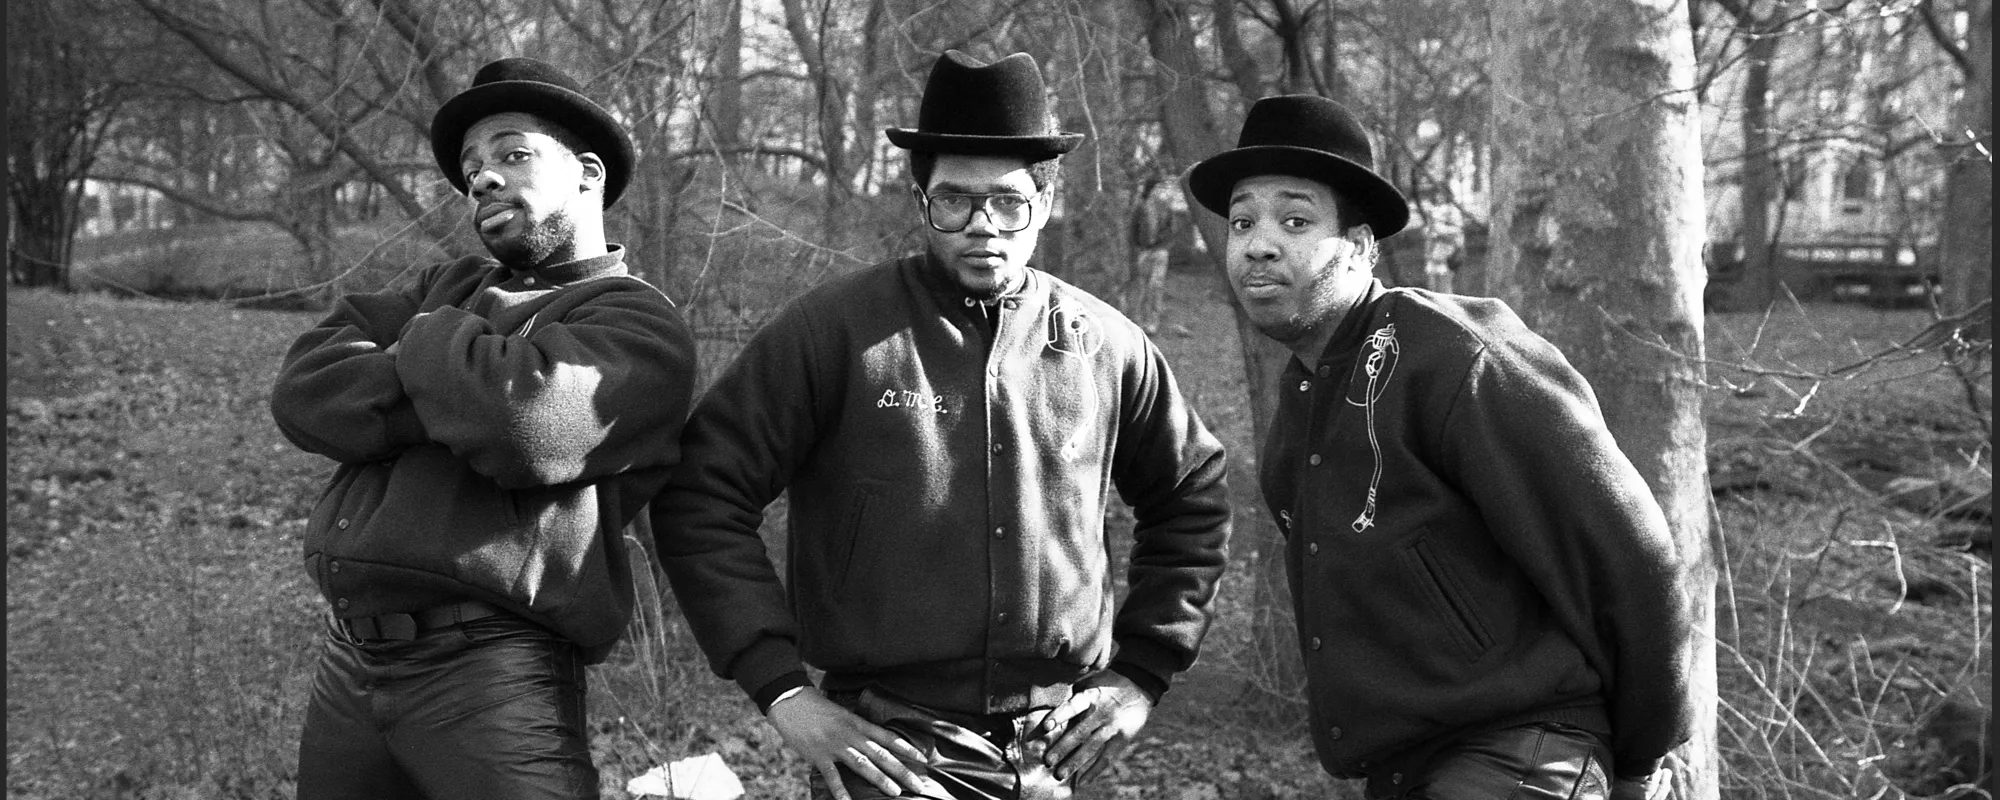 The Meaning Behind Run-DMC’s “It’s Tricky”